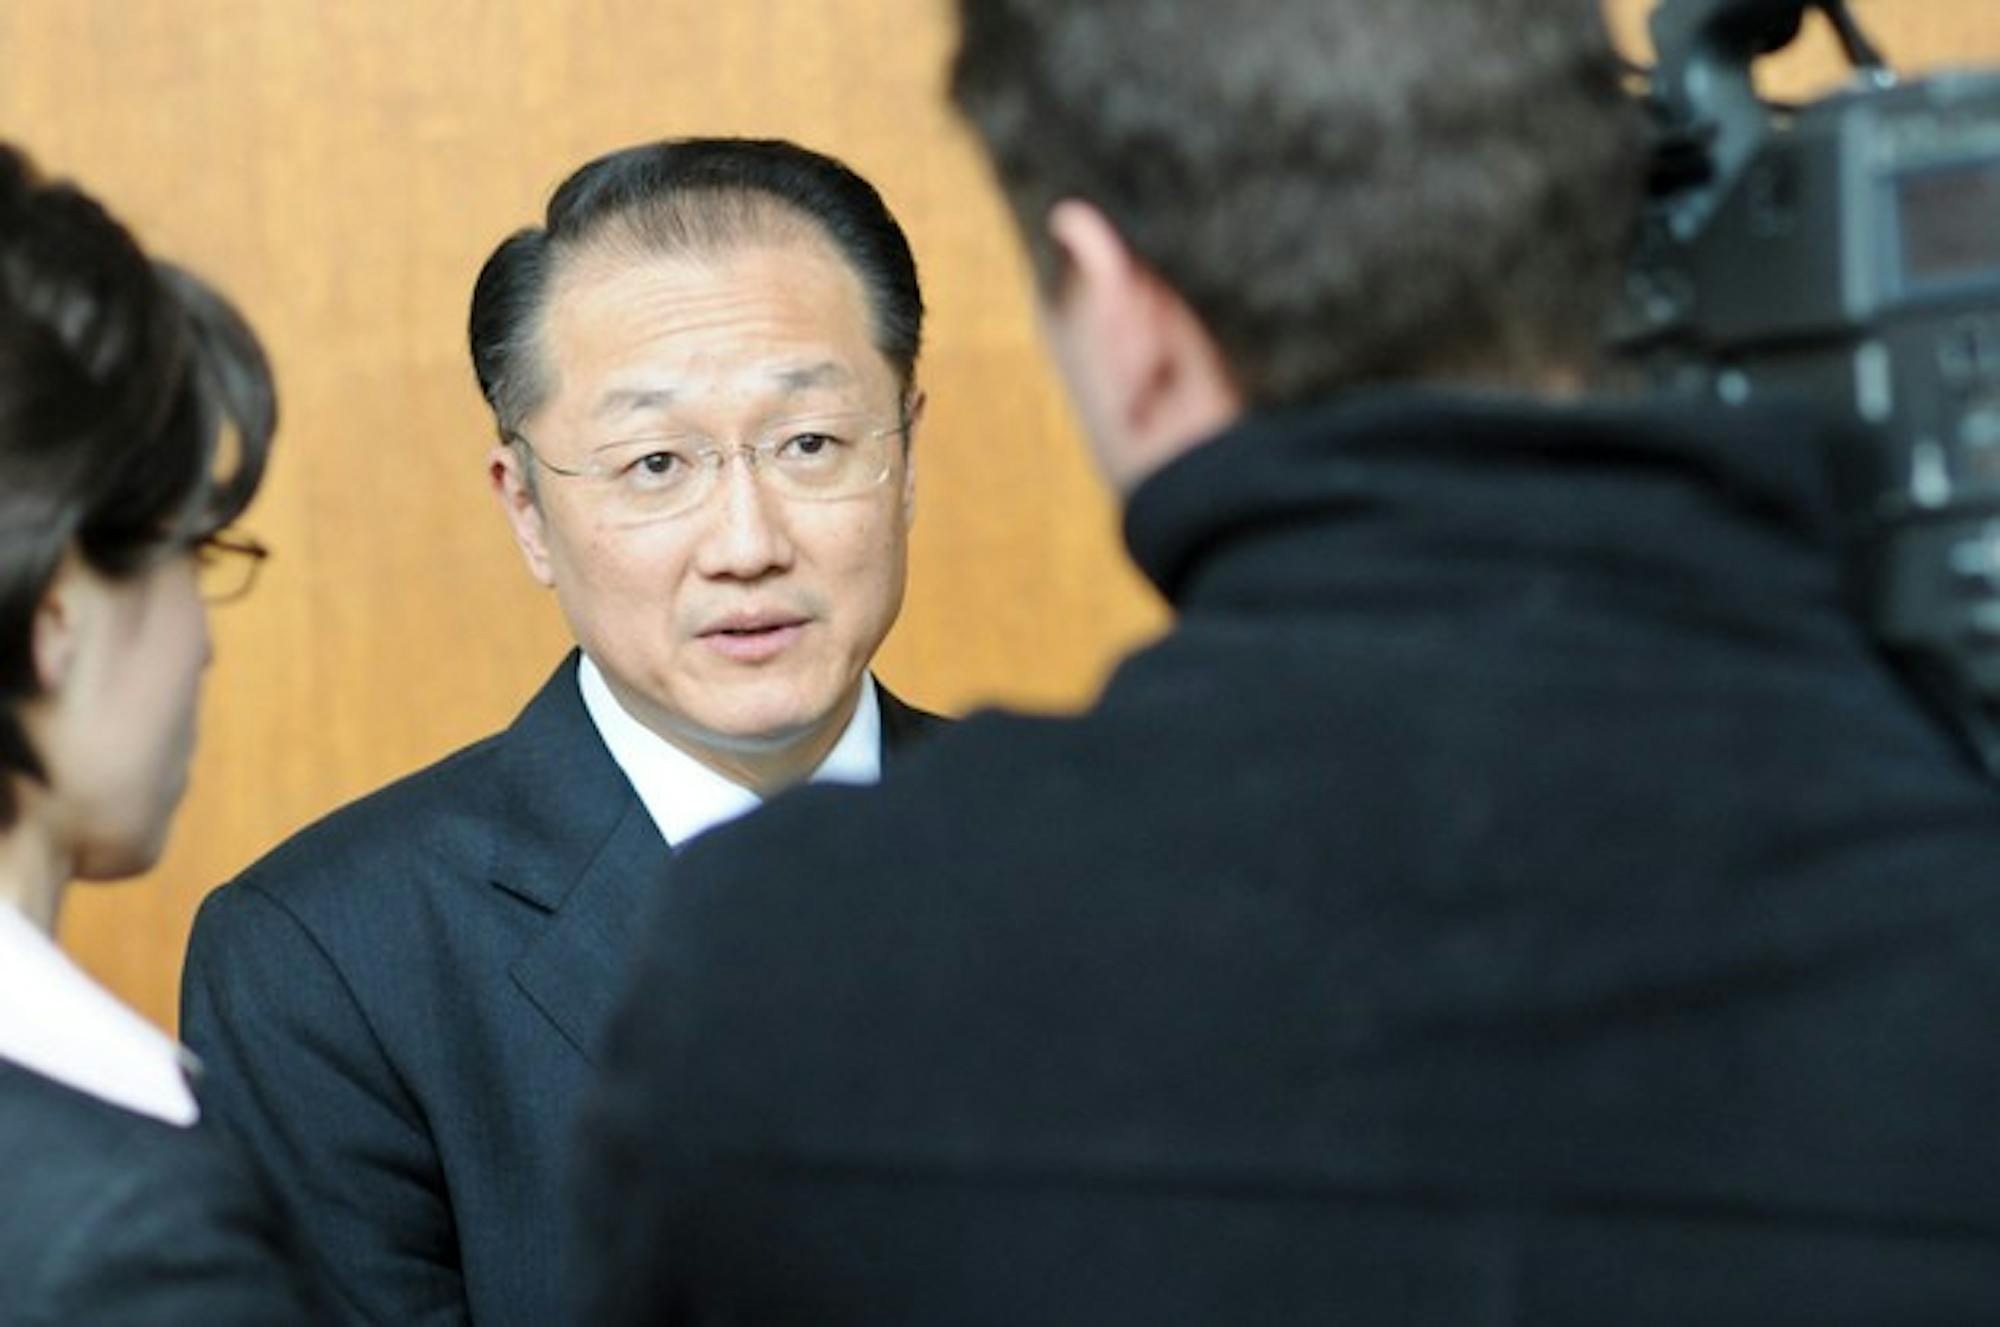 Korean and Korean-American newspapers have reported on the selection of Jim Yong Kim as the College's next president.